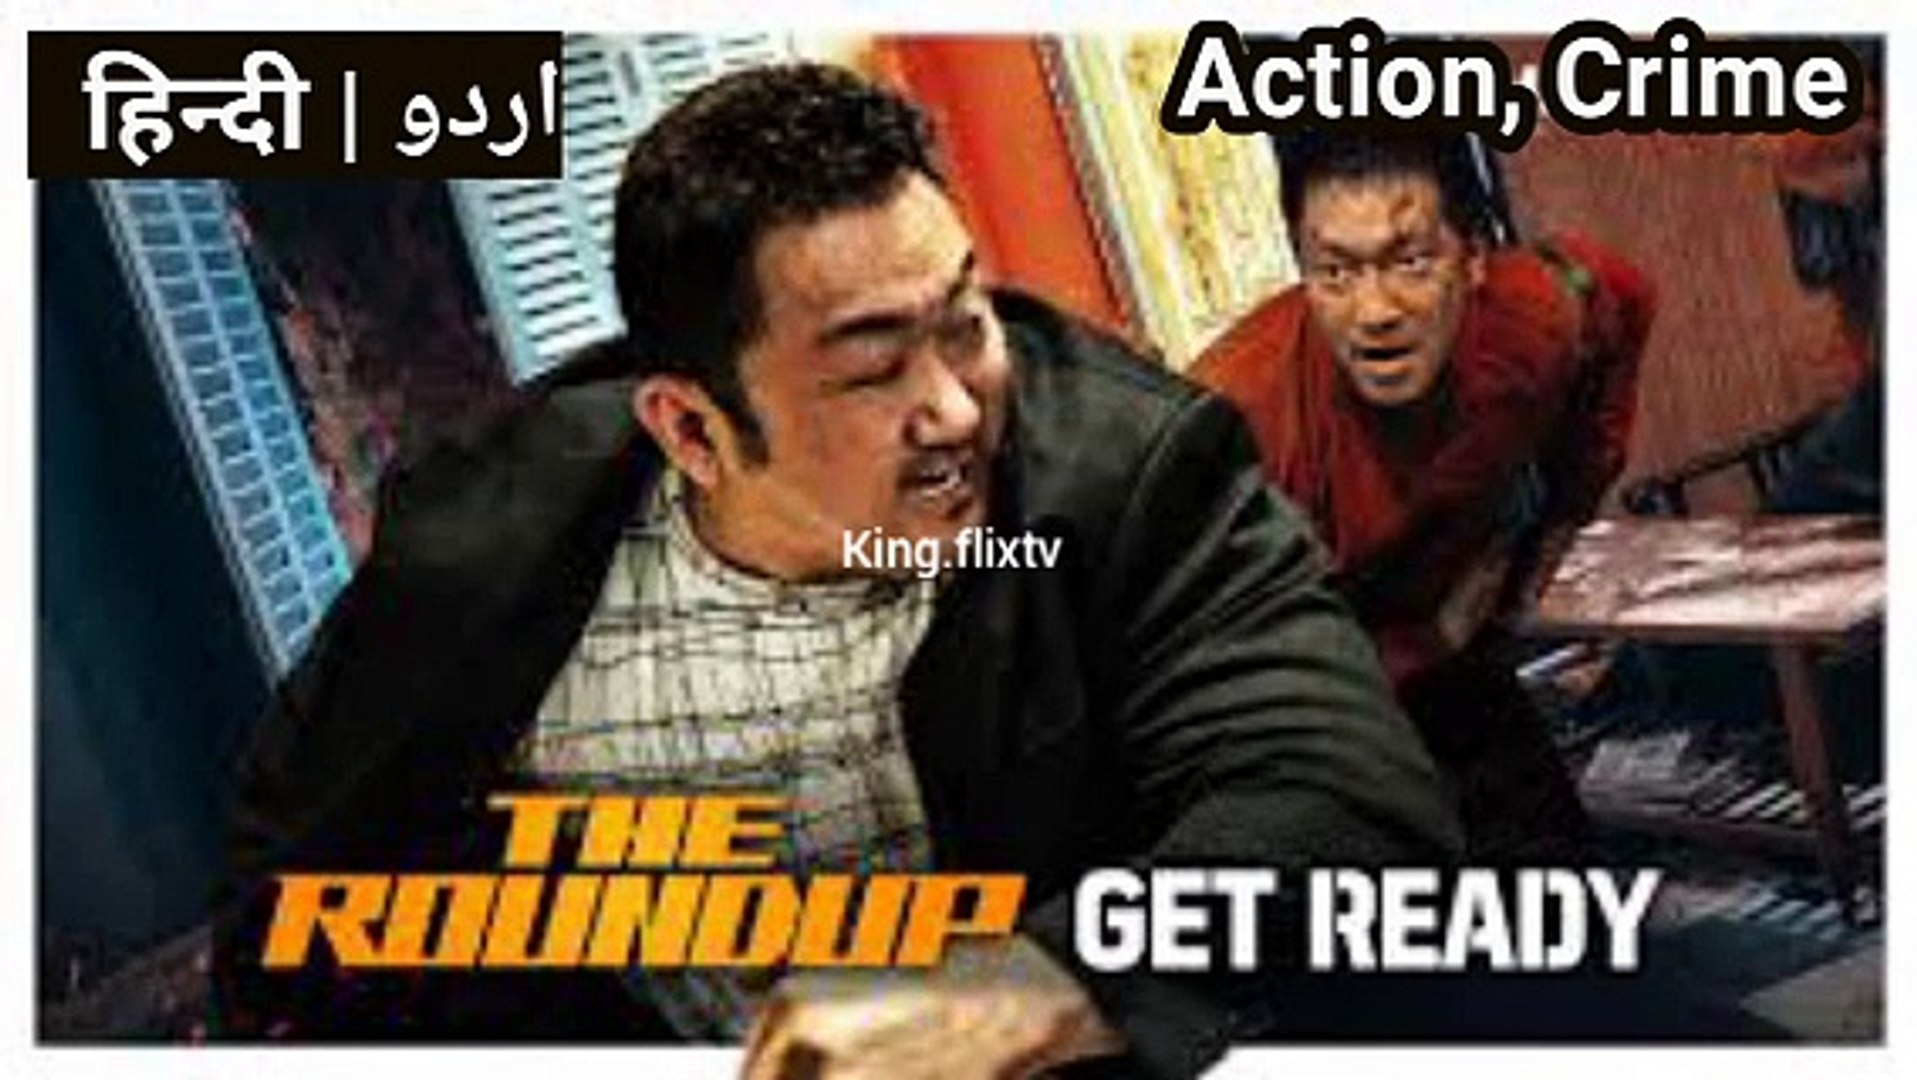 THE ROUNDUP 2023]हिन्दी, اردو, ACTION